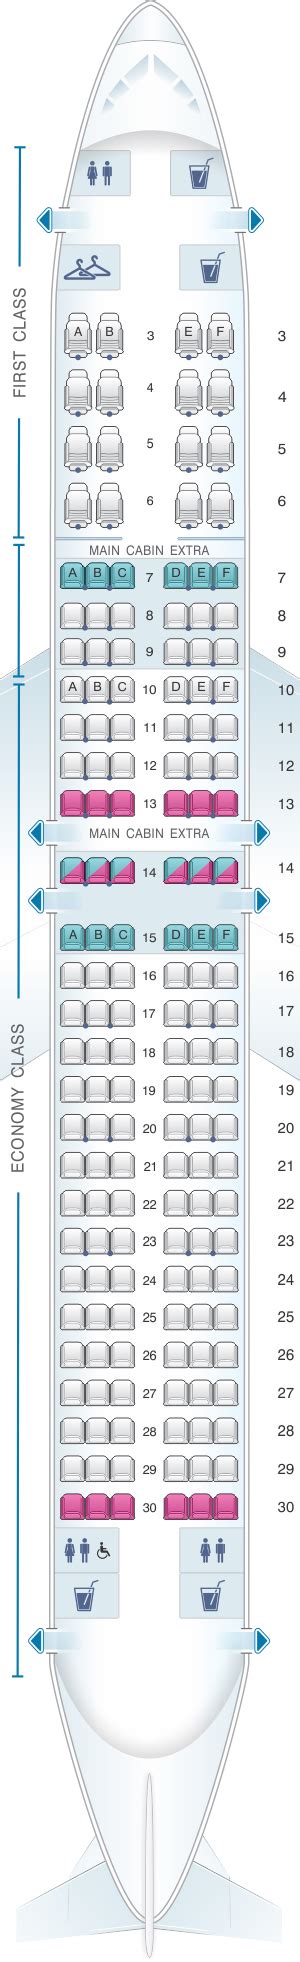 american airlines boeing 737-800 seating map